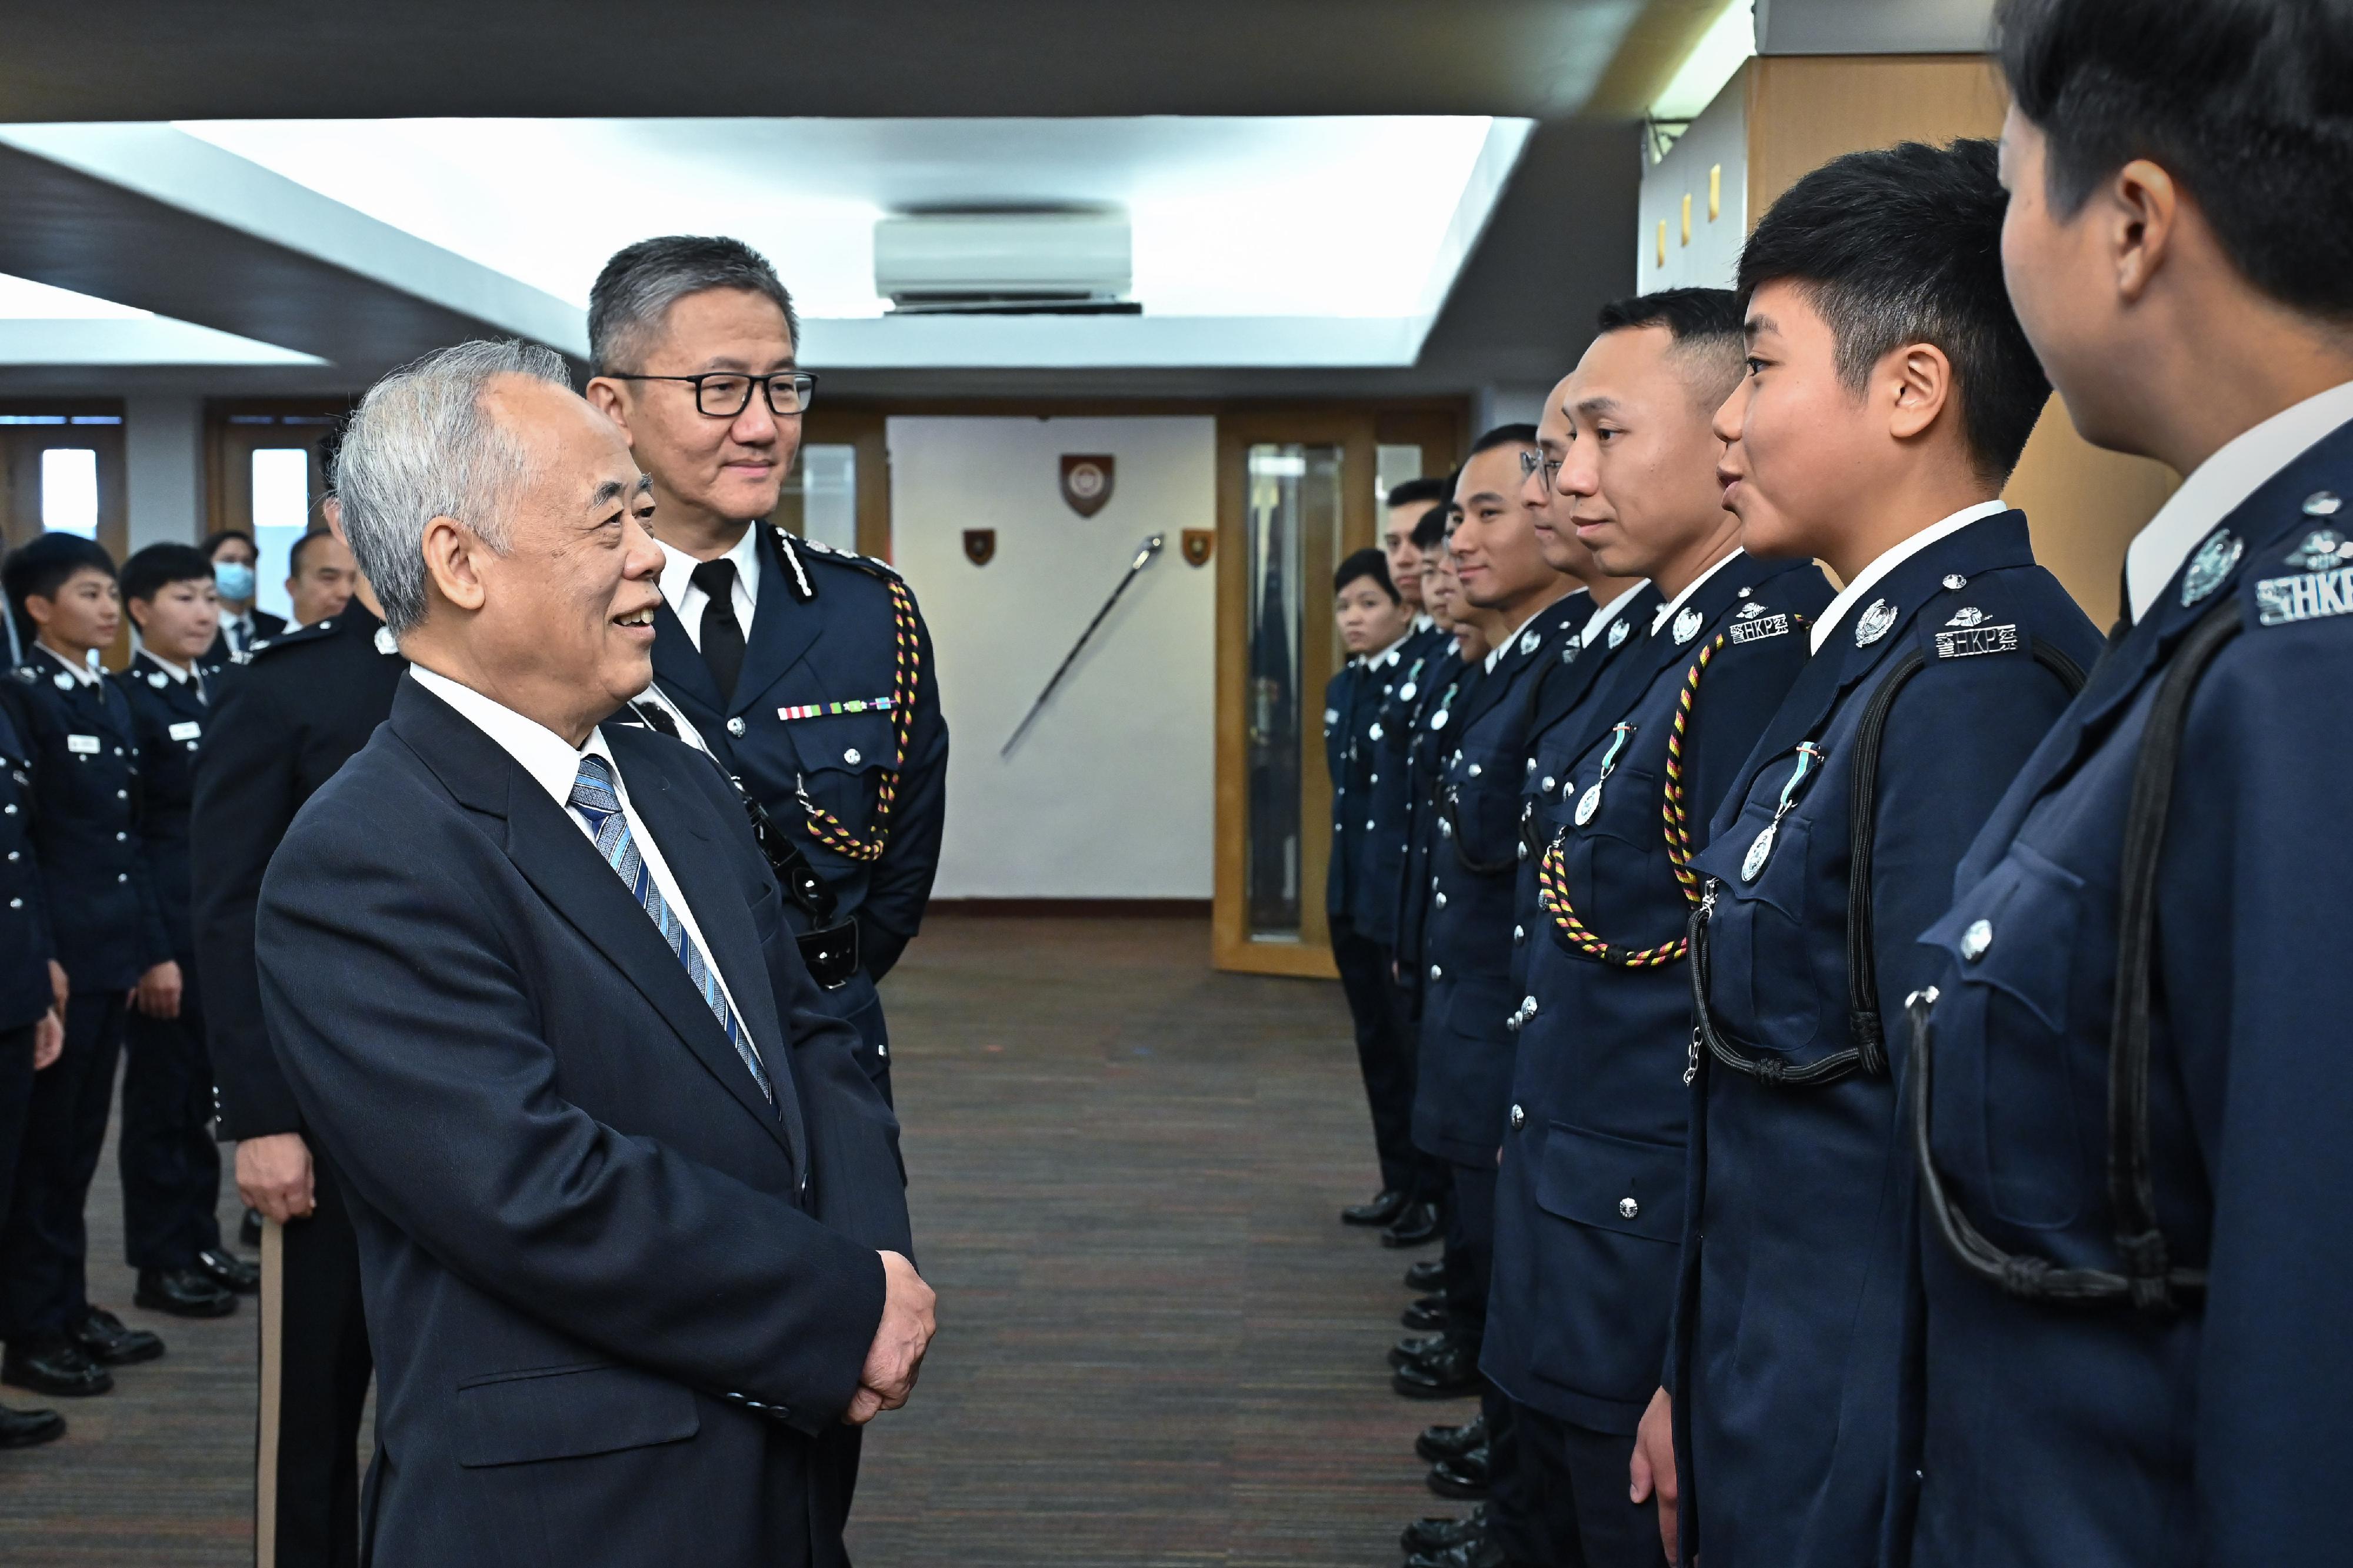 The Commissioner on Interception of Communications and Surveillance, Mr Yeung Chun-kuen (first left), and the Commissioner of Police, Mr Siu Chak-yee (second left) congratulate the probationary inspectors after the passing-out parade held at the Hong Kong Police College today (November 25).